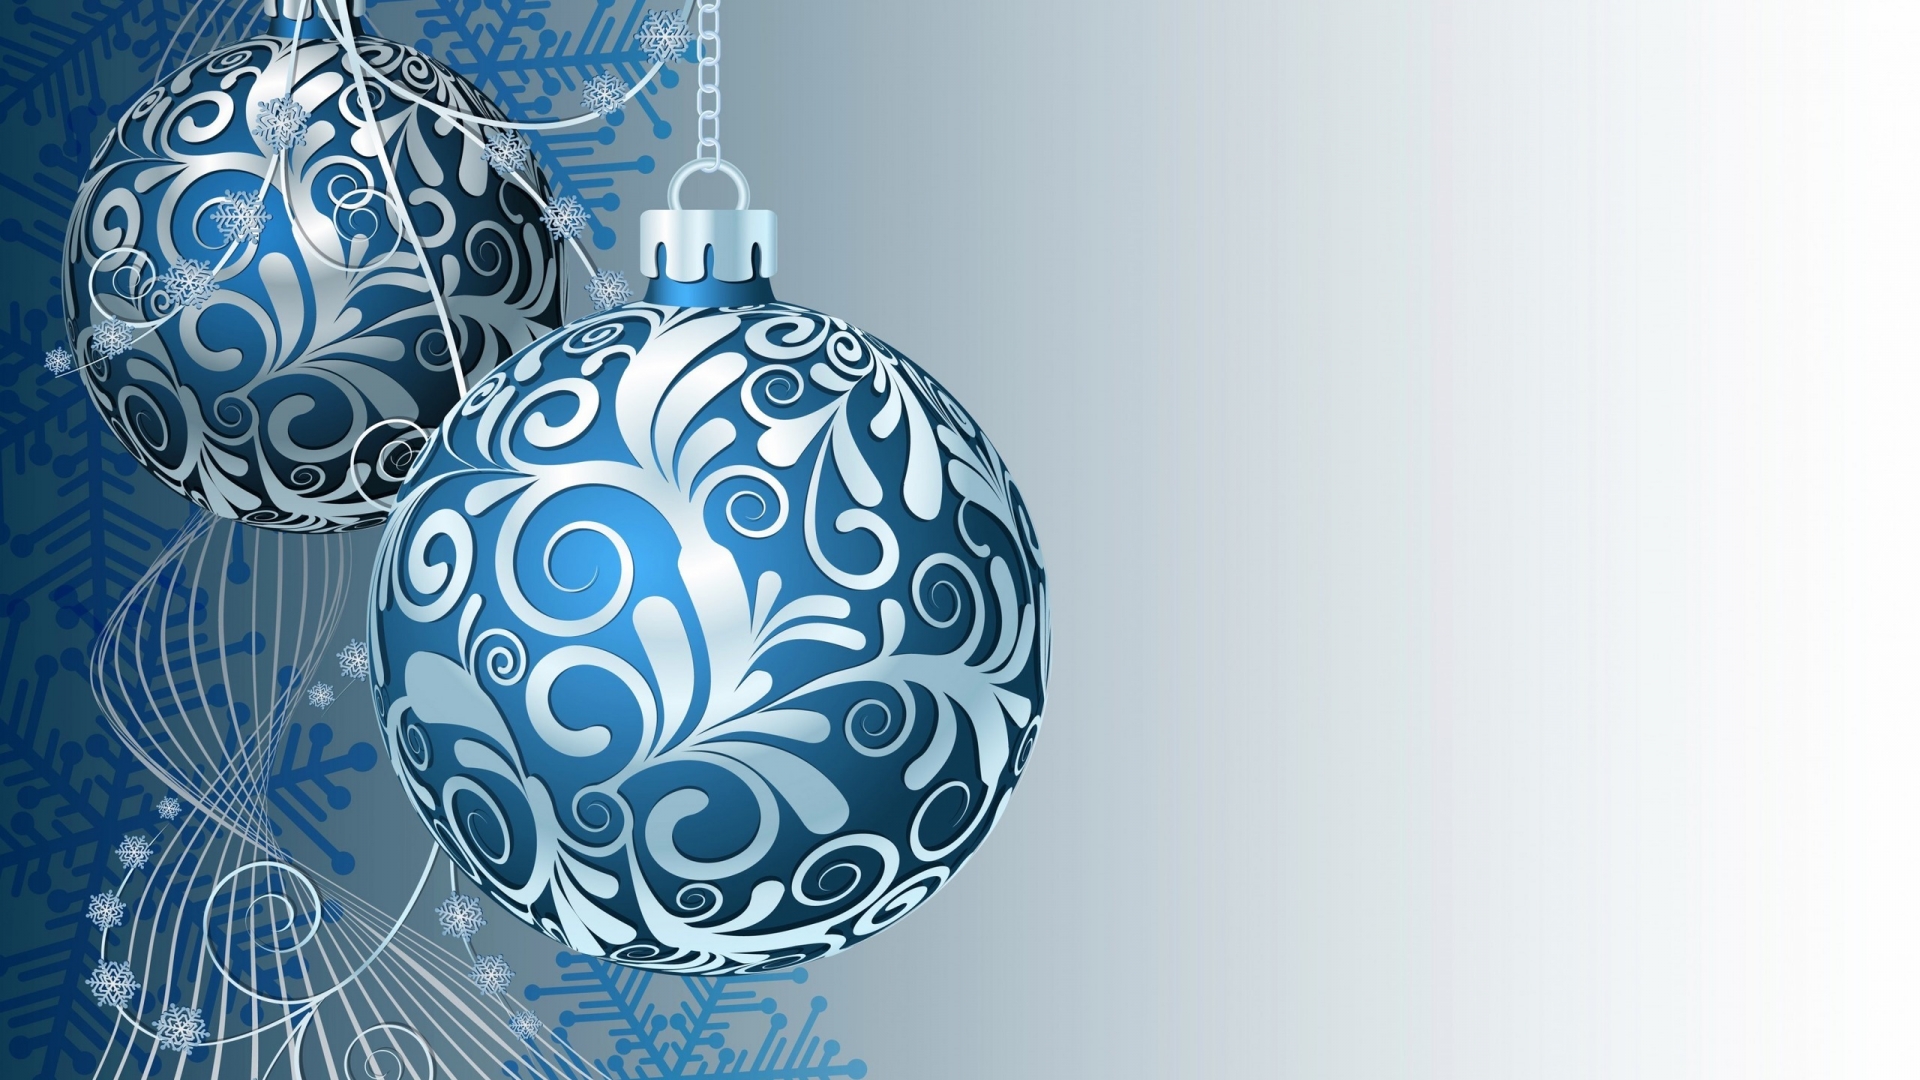 Gorgeous Ornaments for Christmas for 1920 x 1080 HDTV 1080p resolution